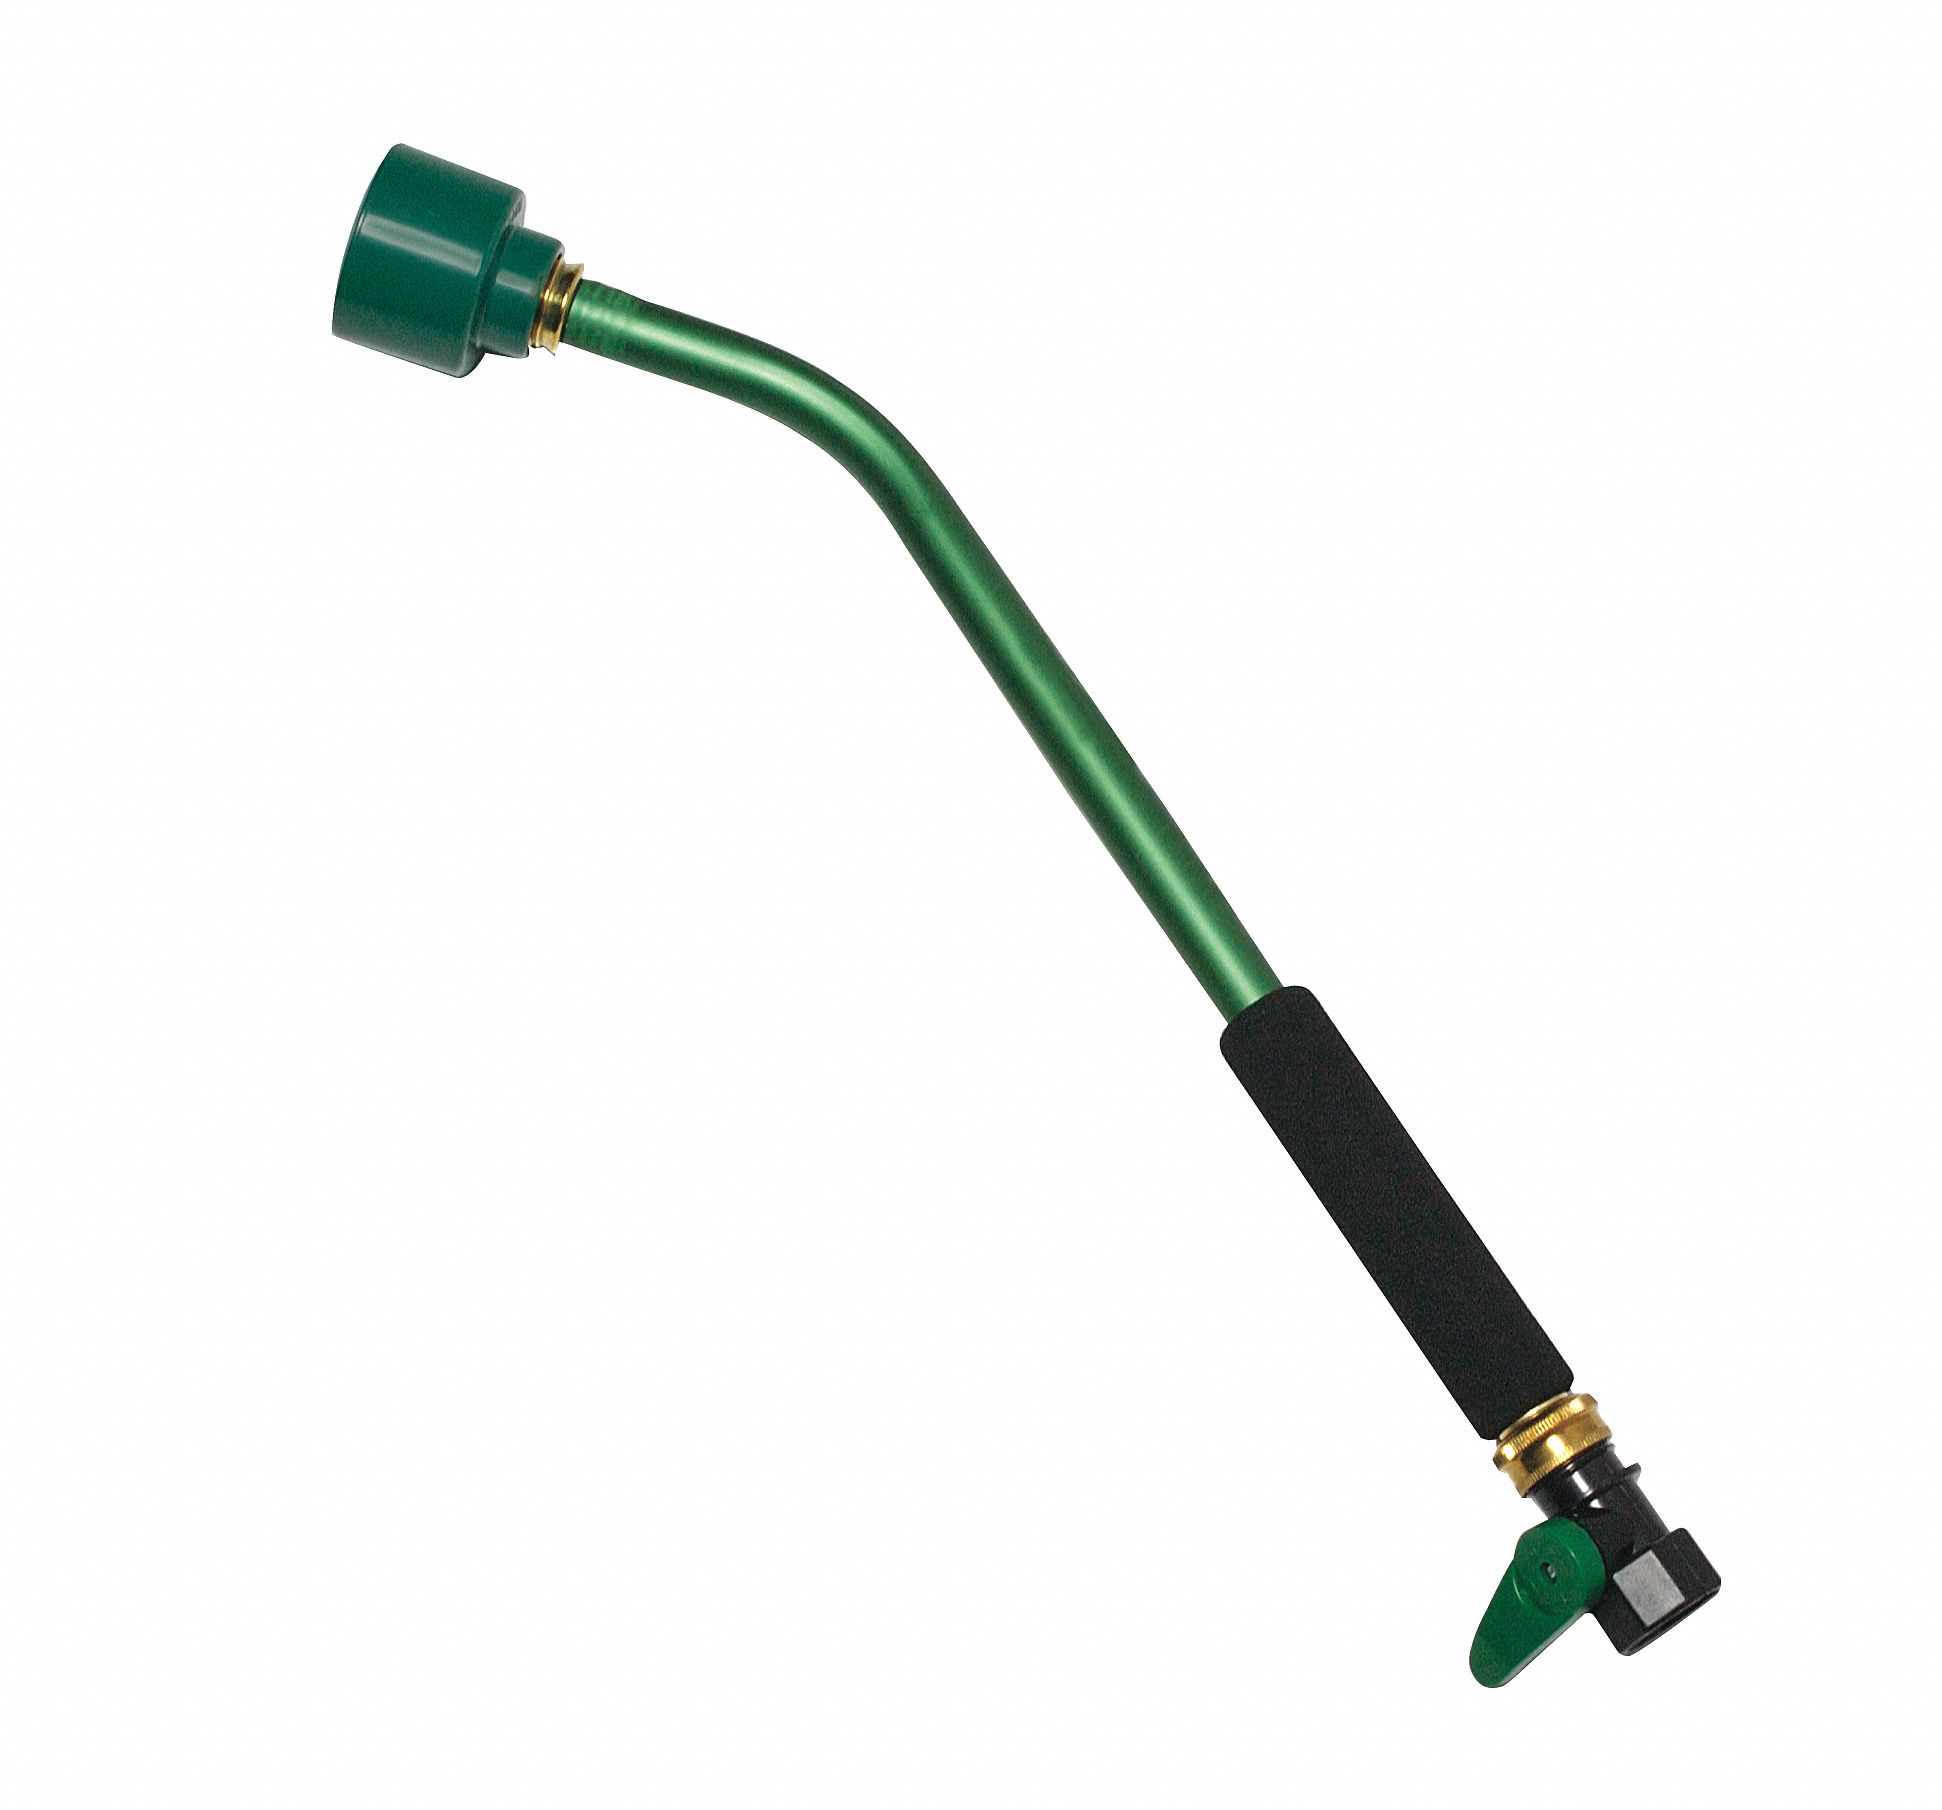 Watering Wand: 100 psi Max. Pressure, Lever, GHT, Aluminum, Green